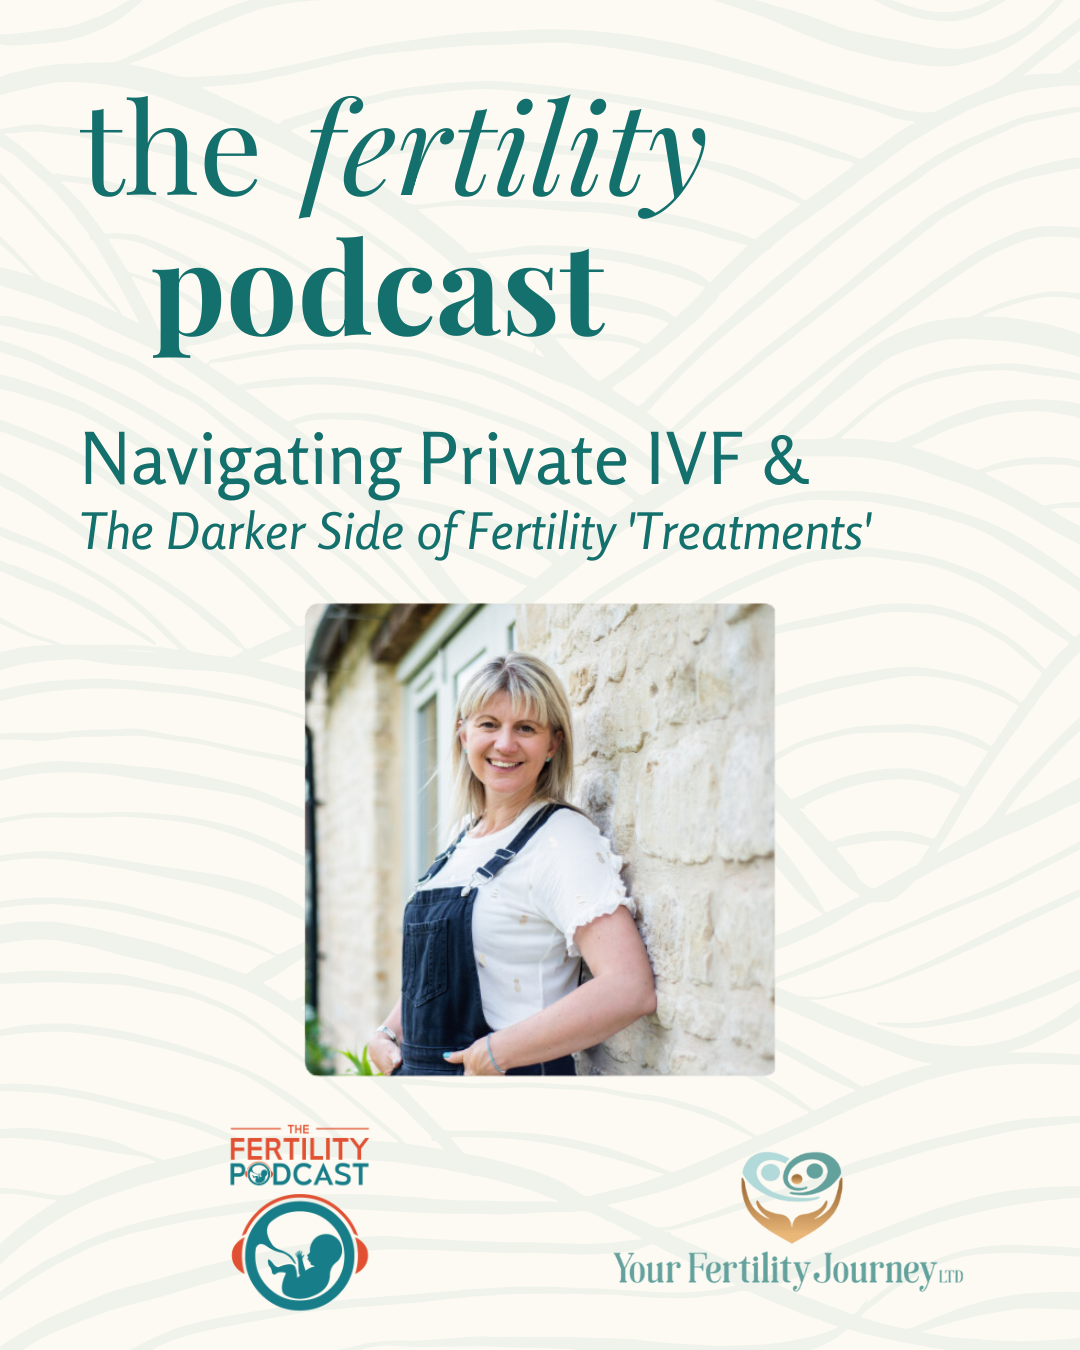 Kate – Navigating Private IVF & The Darker Side of Fertility ‘Treatments’